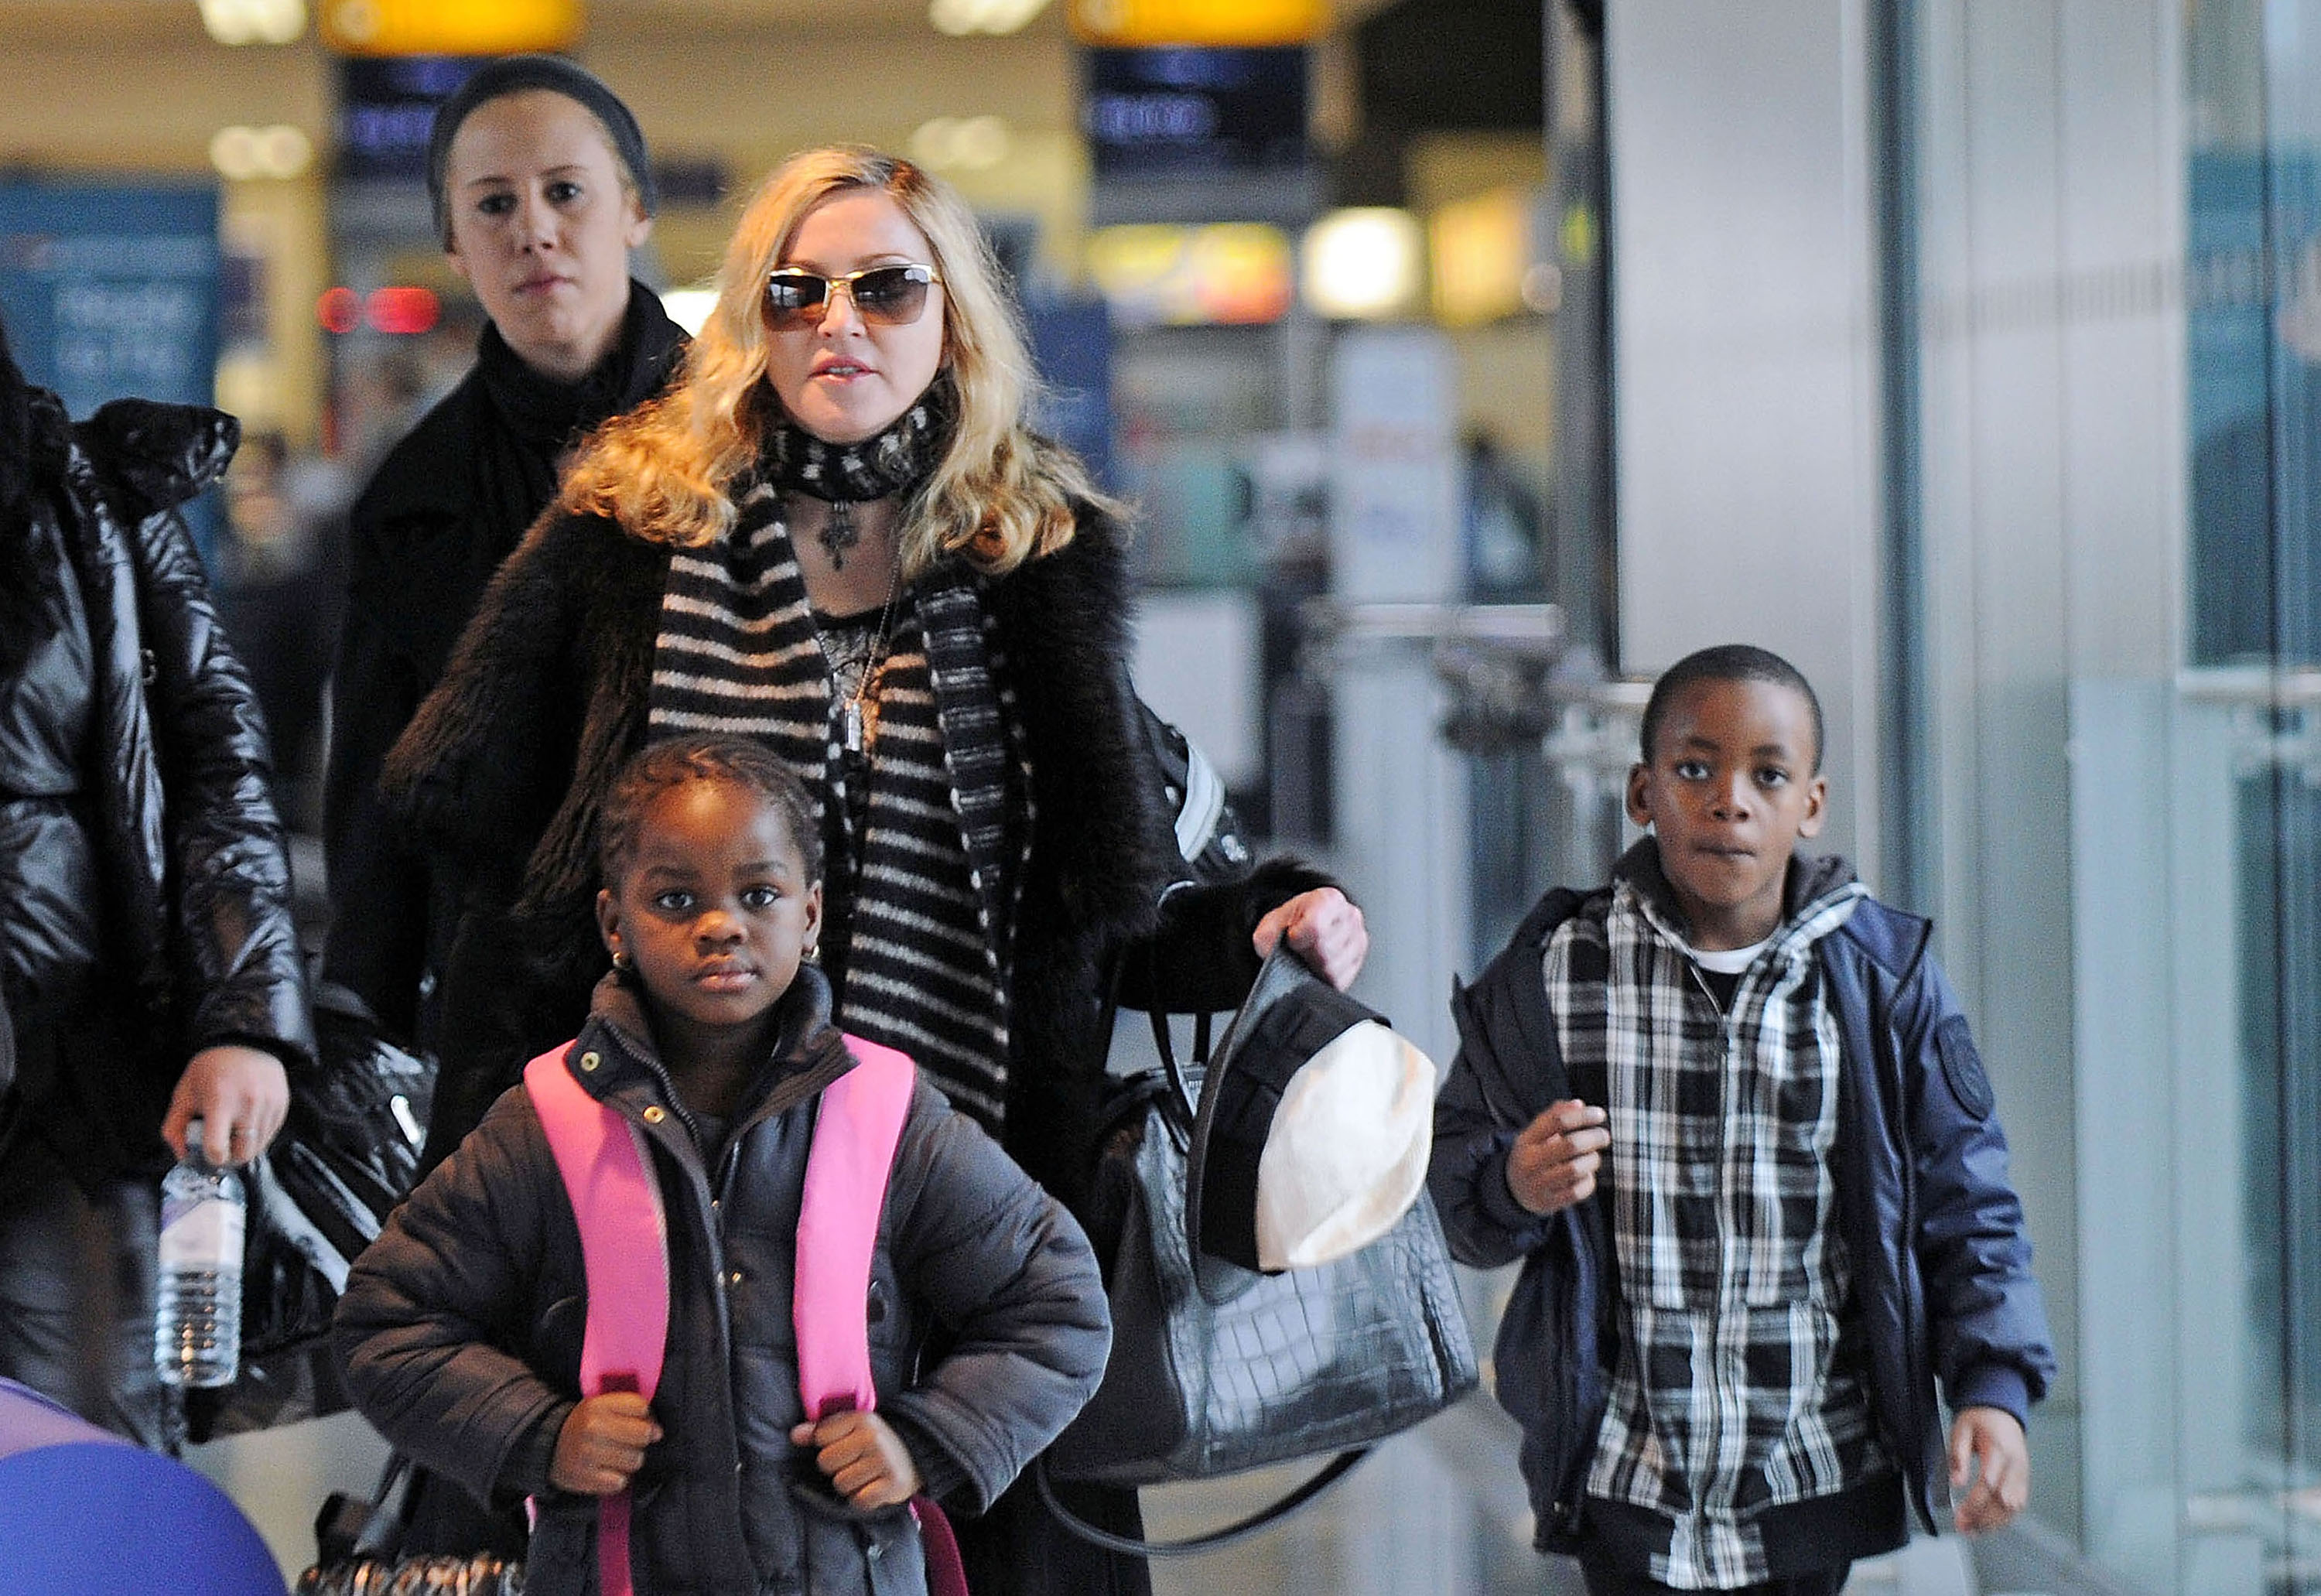 Madonna walks with son David and daughter Mercy in London, UK on April 2, 2011 | Photo: Getty Images